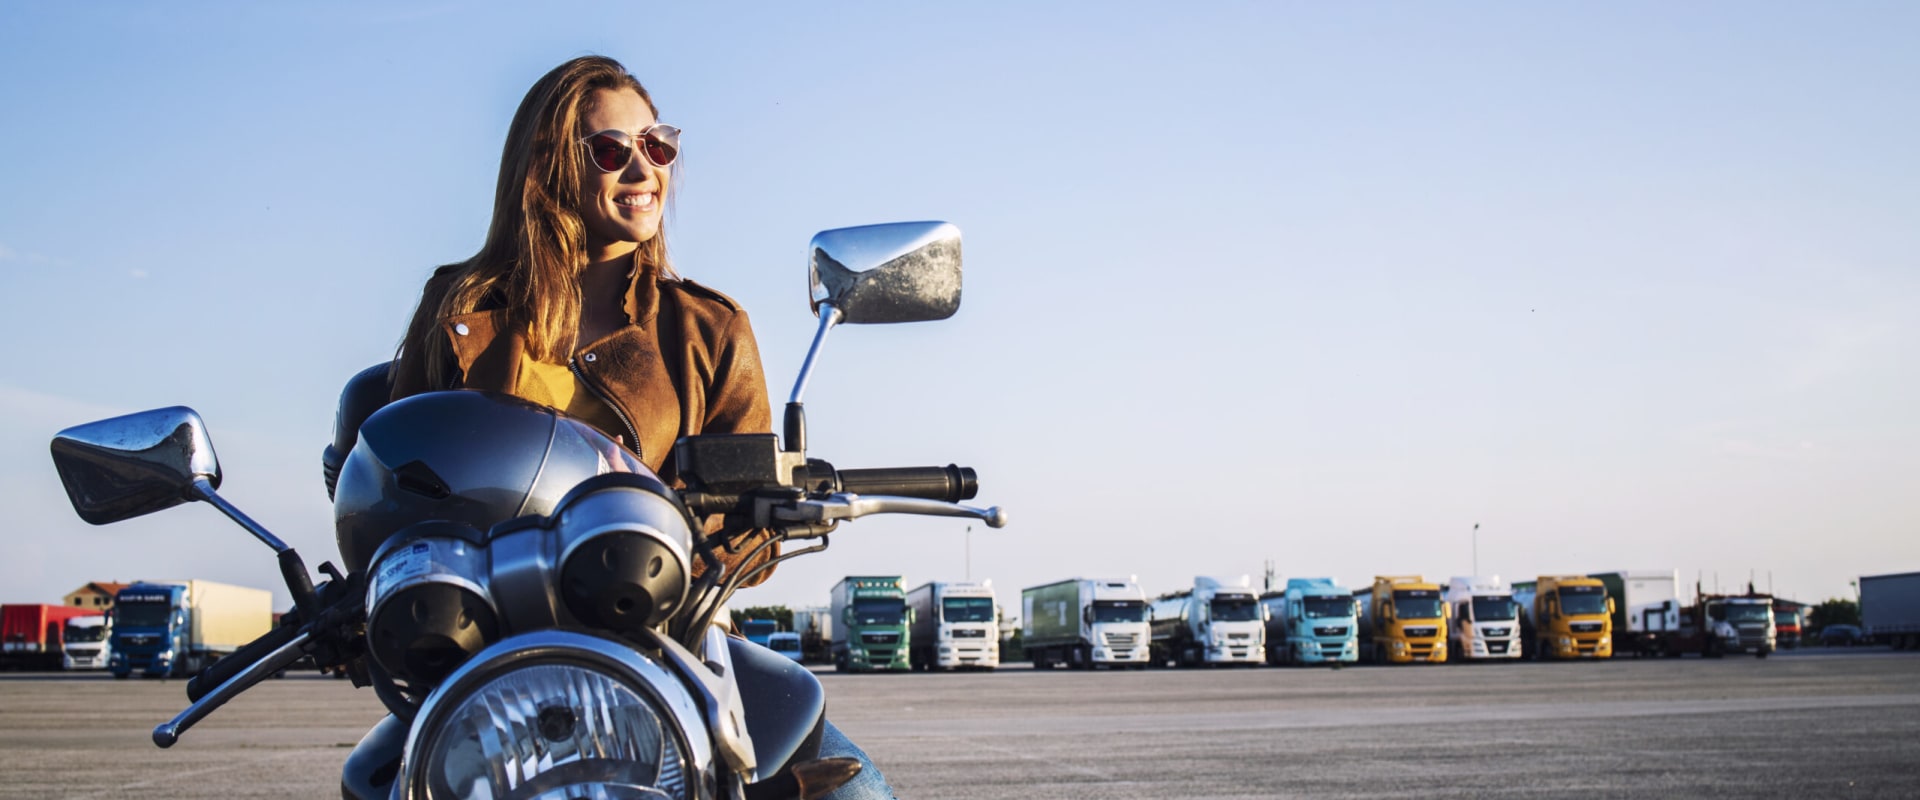 Motorcycle Accident Insurance for New Riders